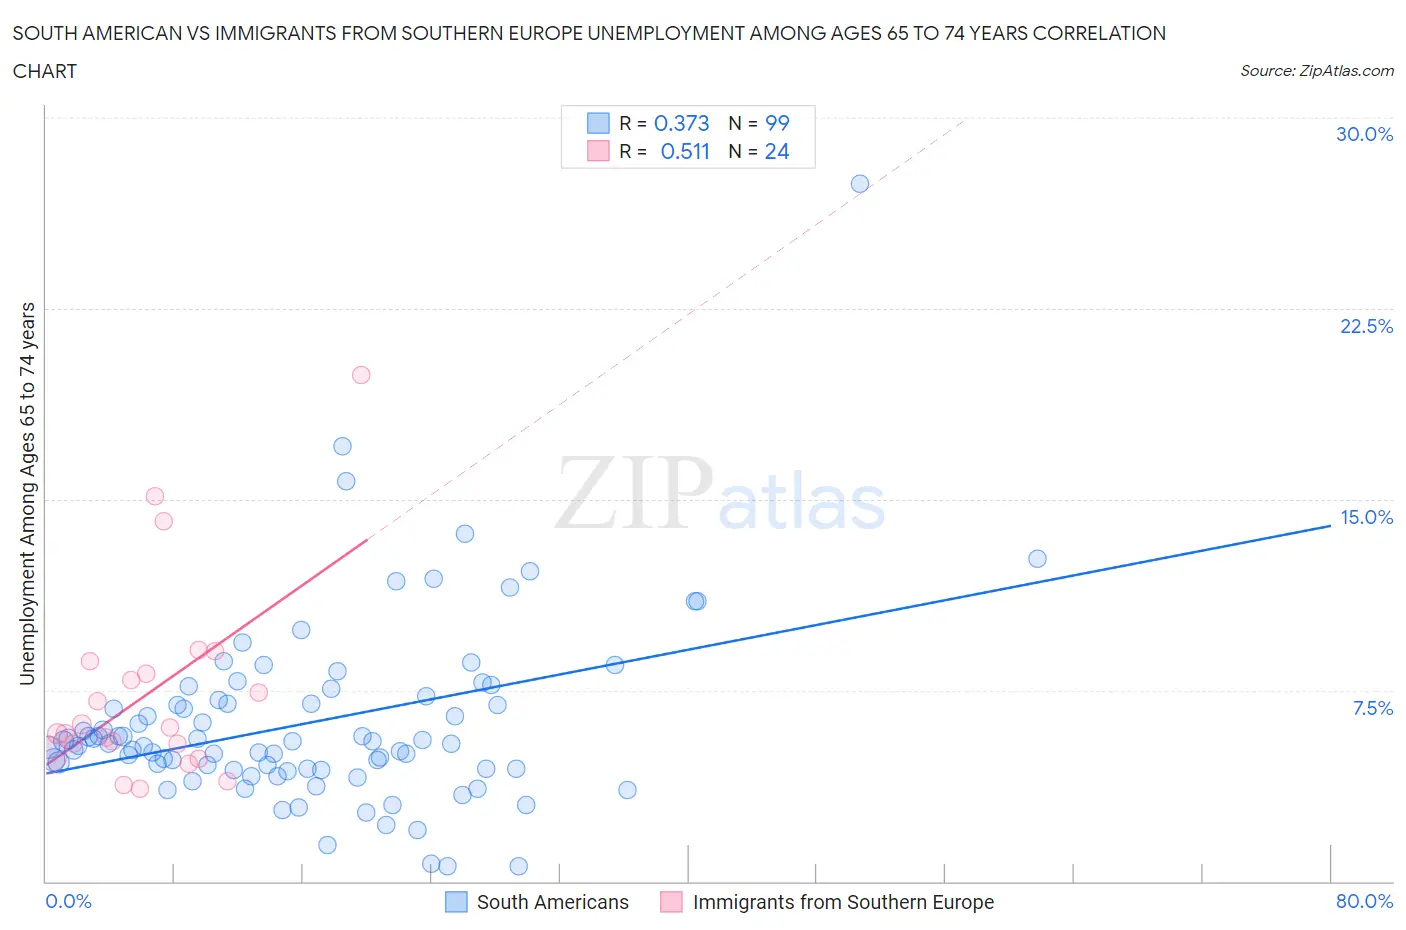 South American vs Immigrants from Southern Europe Unemployment Among Ages 65 to 74 years